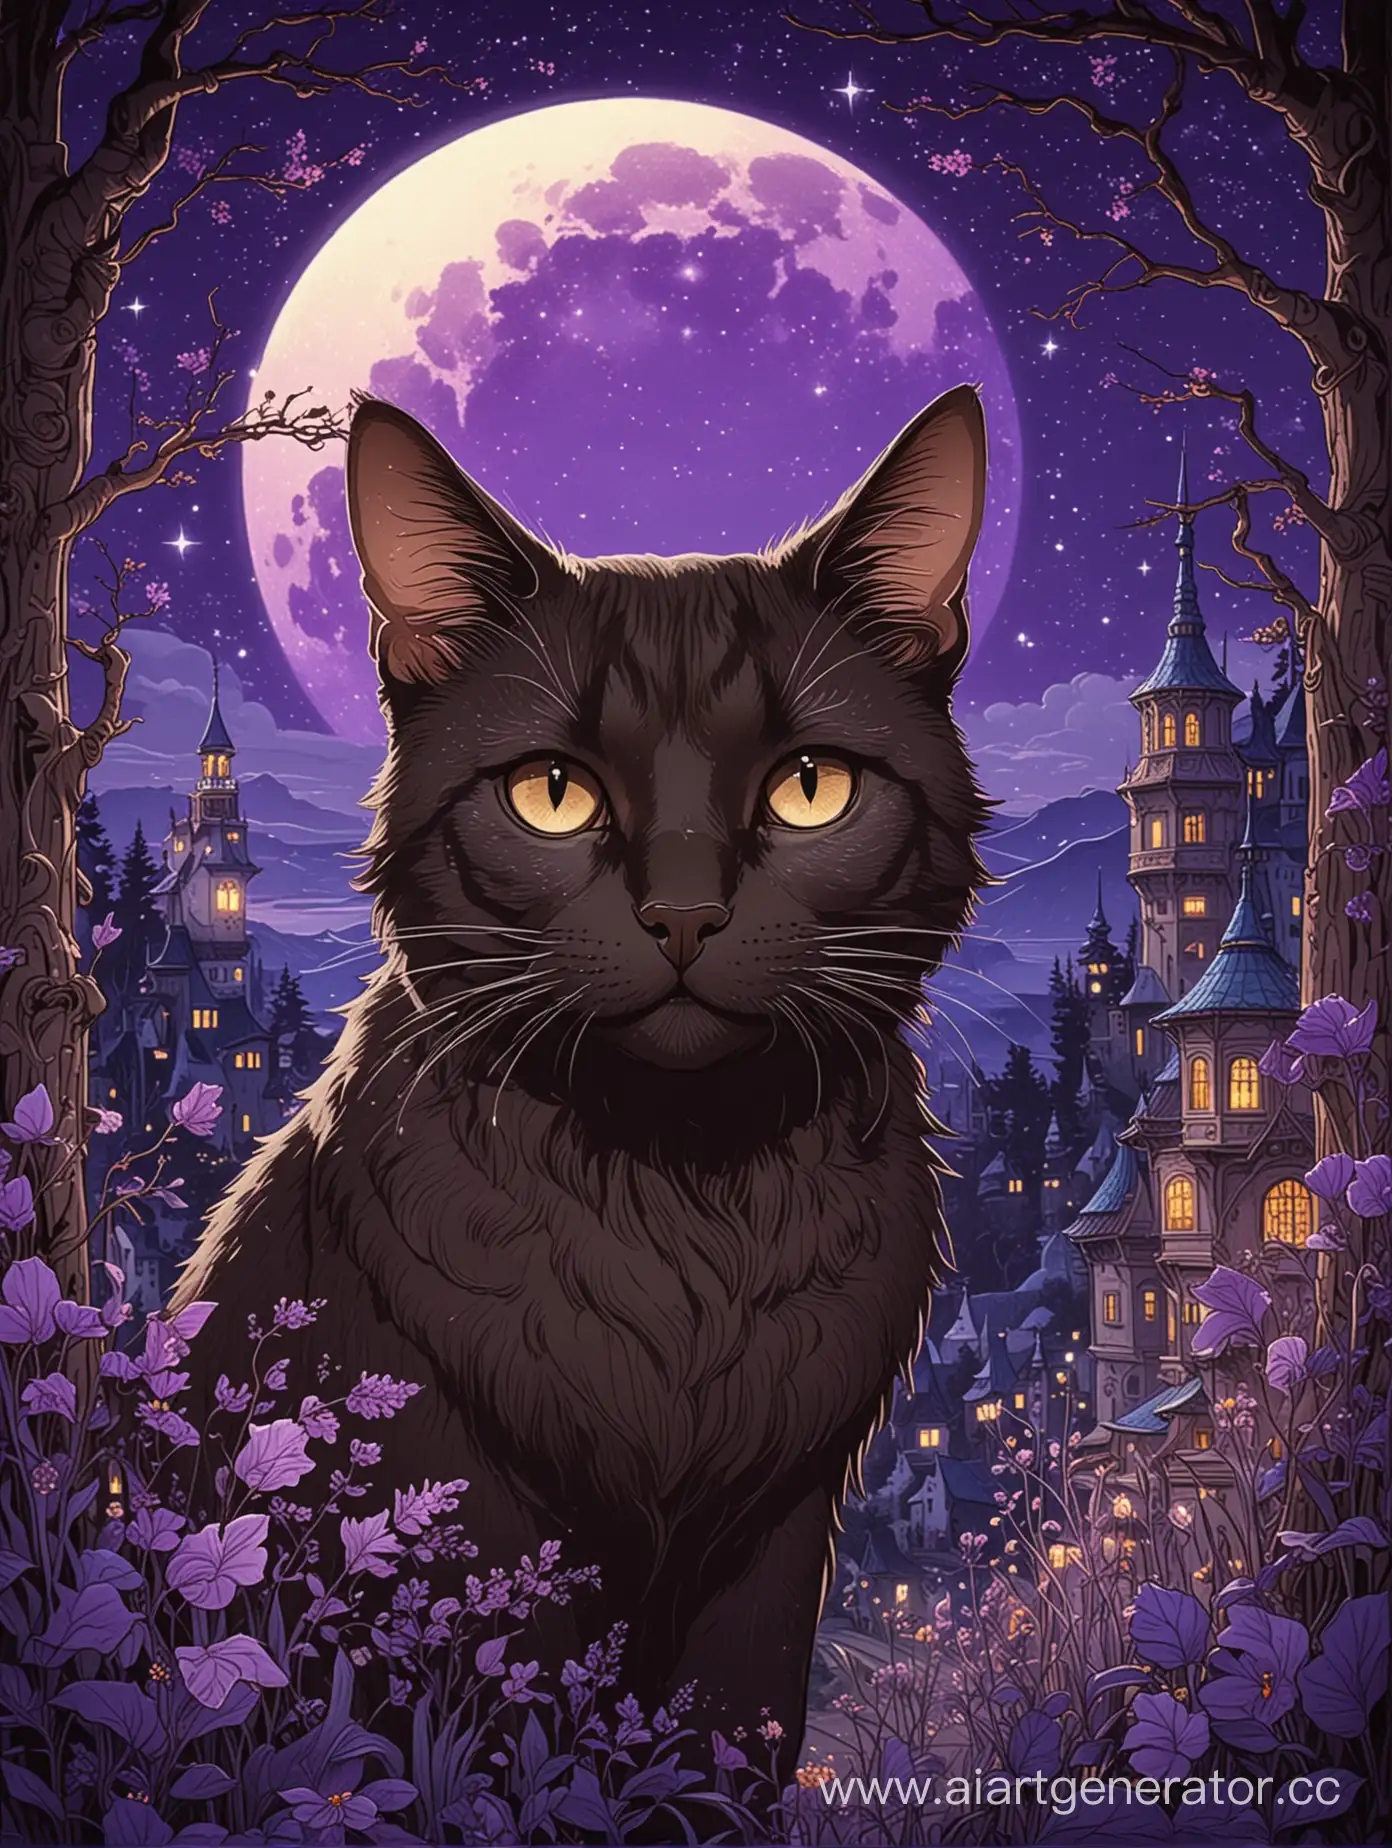 Illustration for a fairy tale in the style of Bilibin, purple night background, dark brown cat's face only, eyes shining